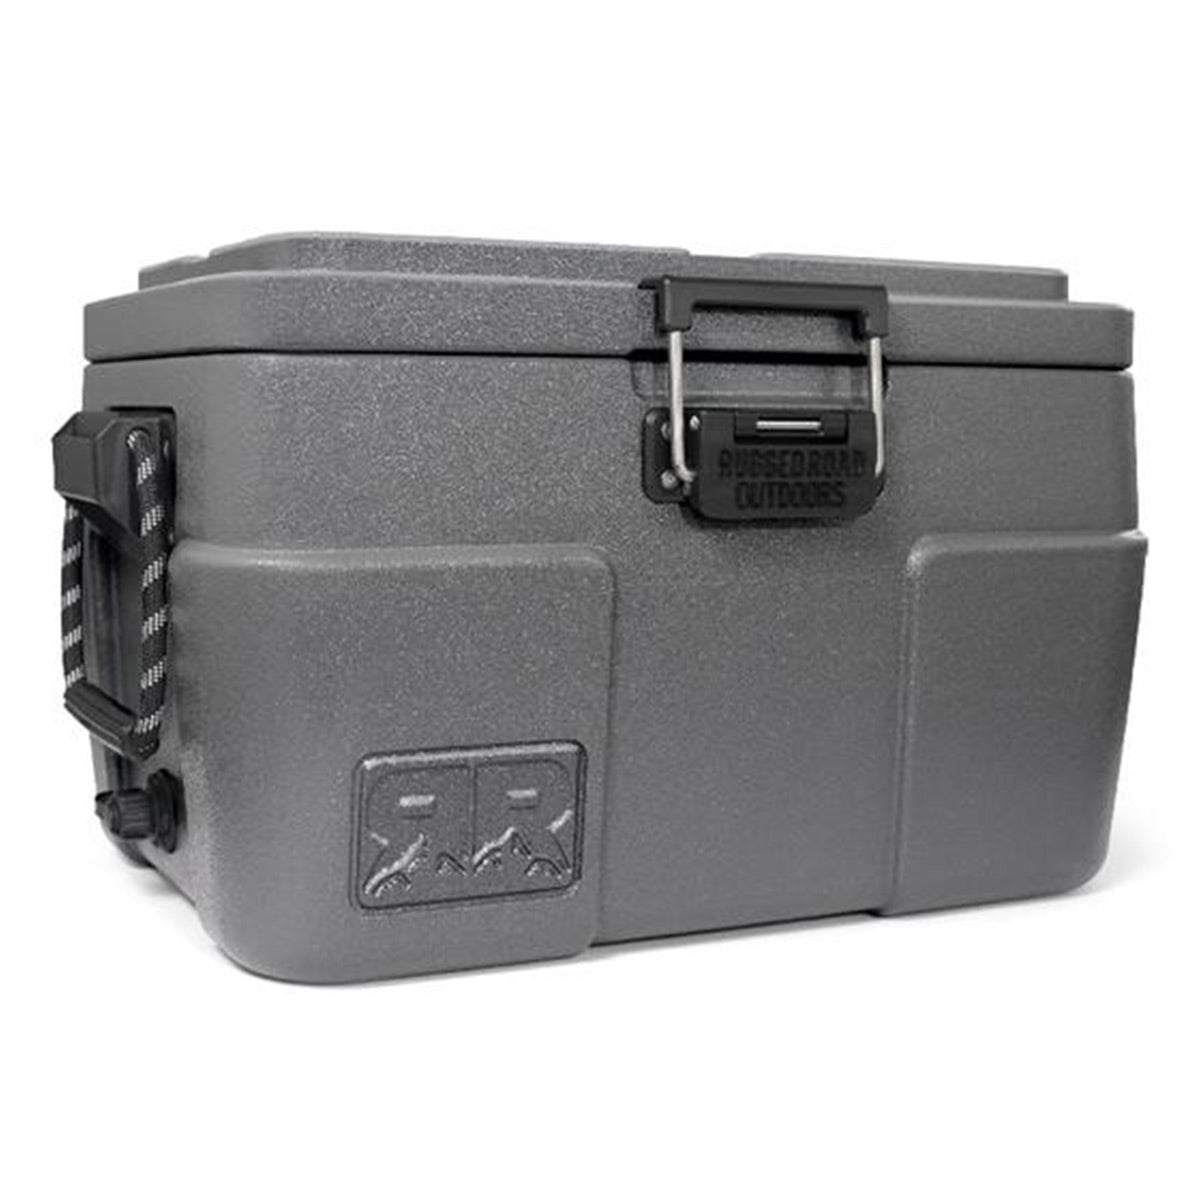 Rugged Road 65 Light Weight Cooler with Rigorite Coating (Gray)